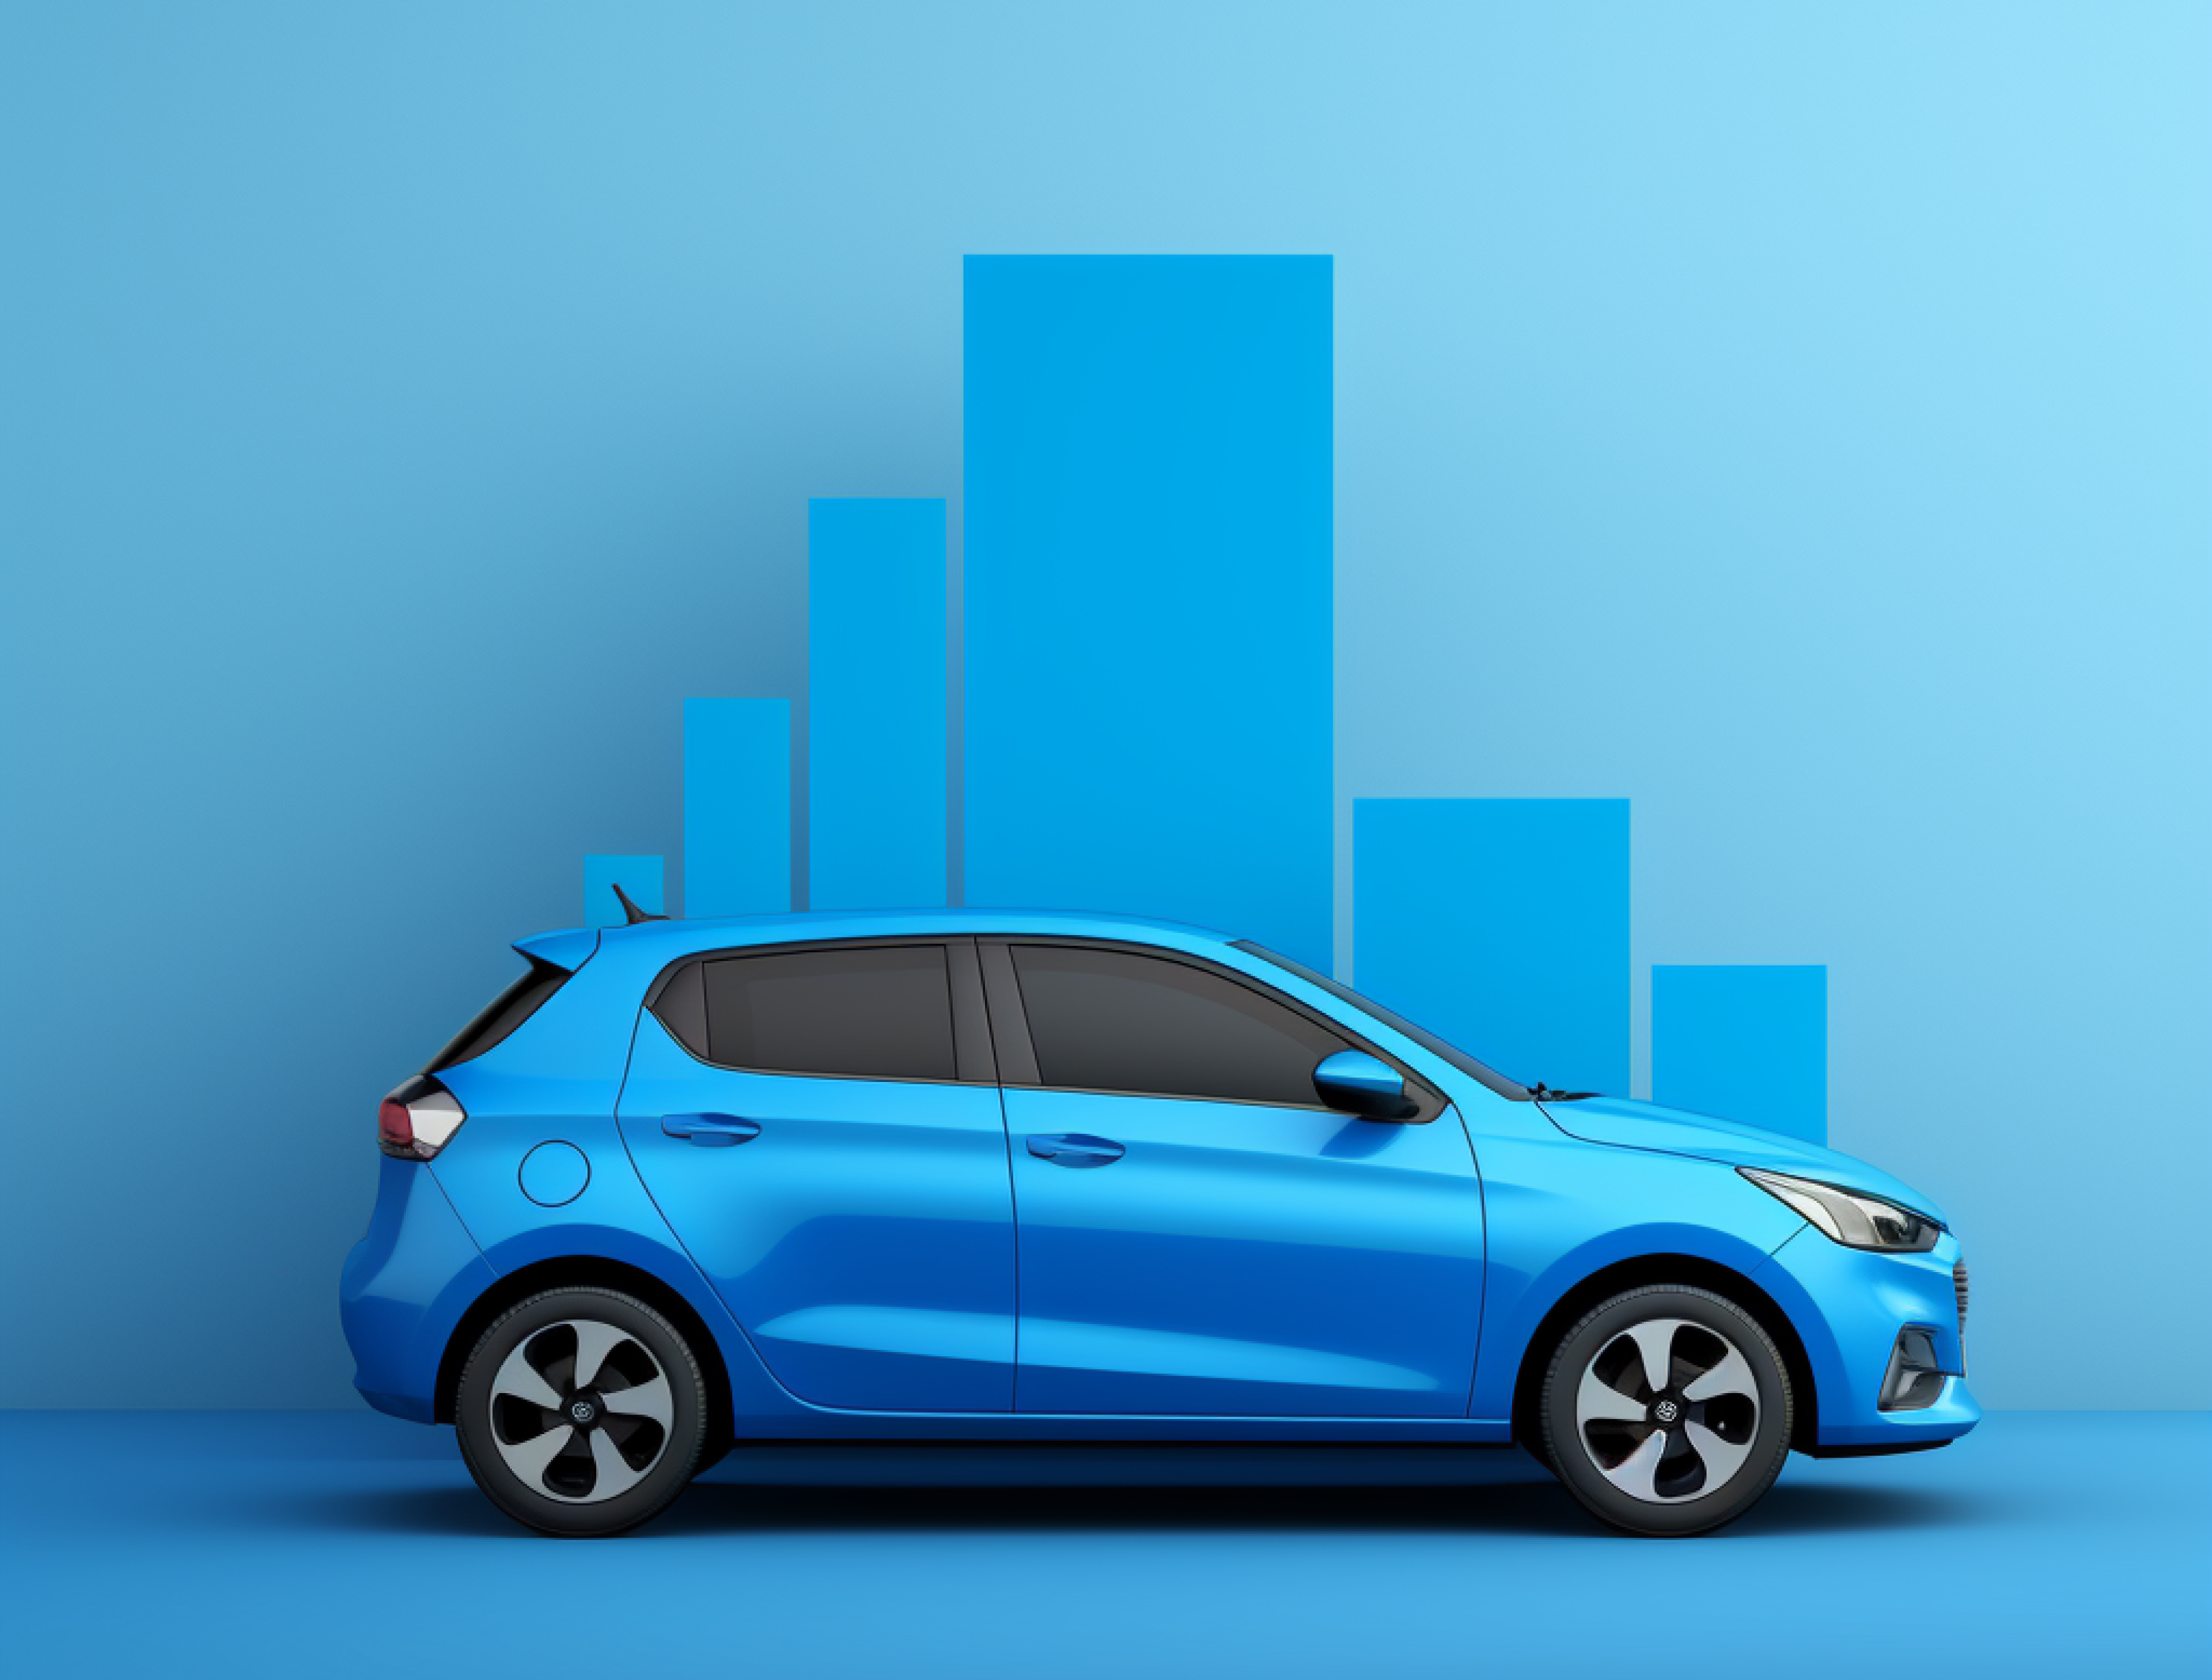 An image of a blue car on a blue background